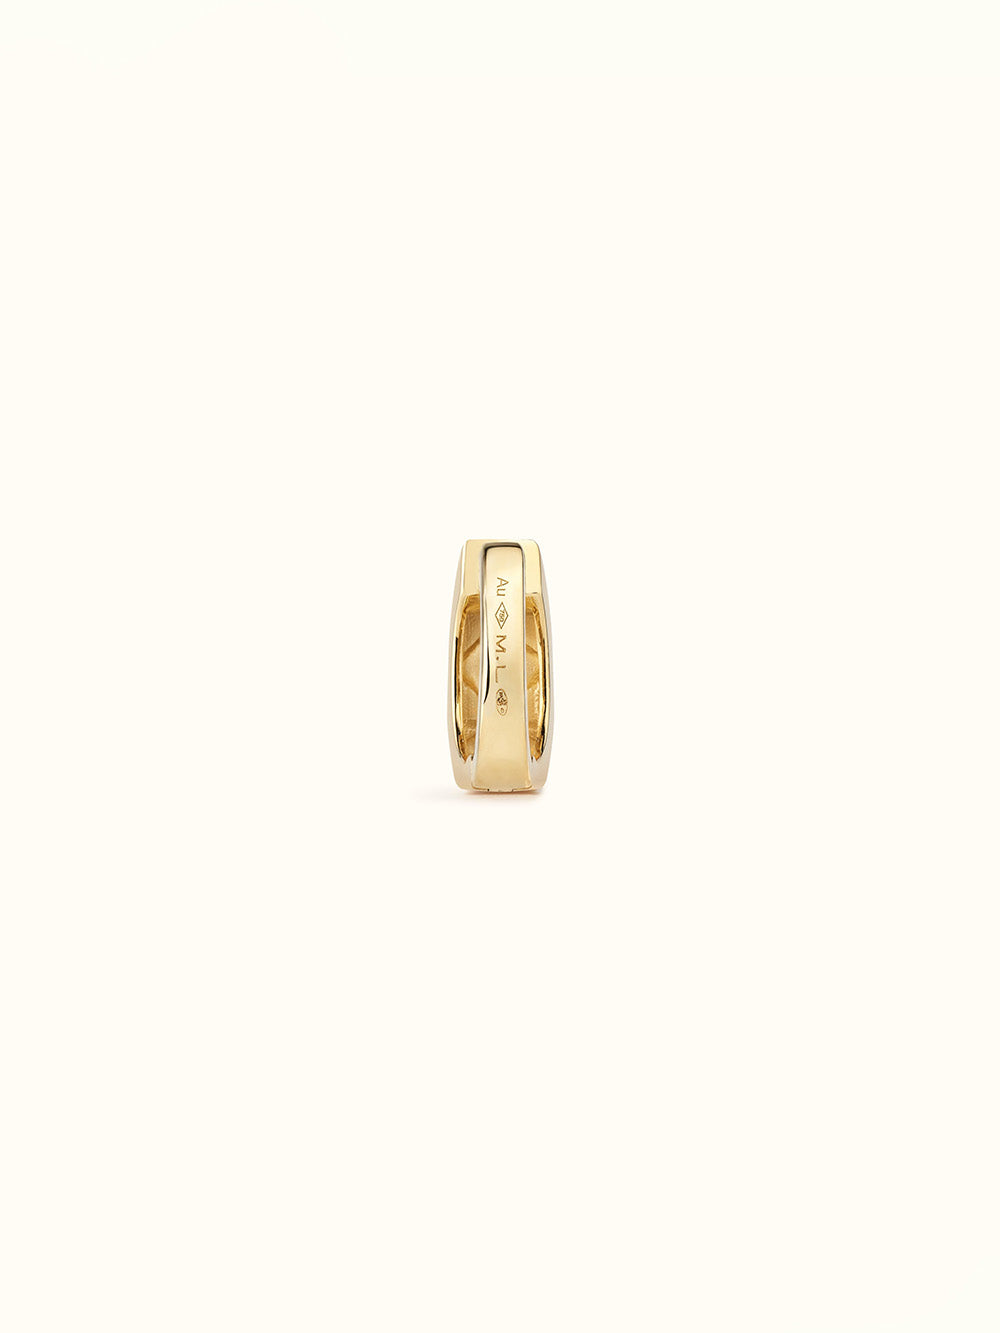 SMALL YELLOW GOLD NUT EARRING